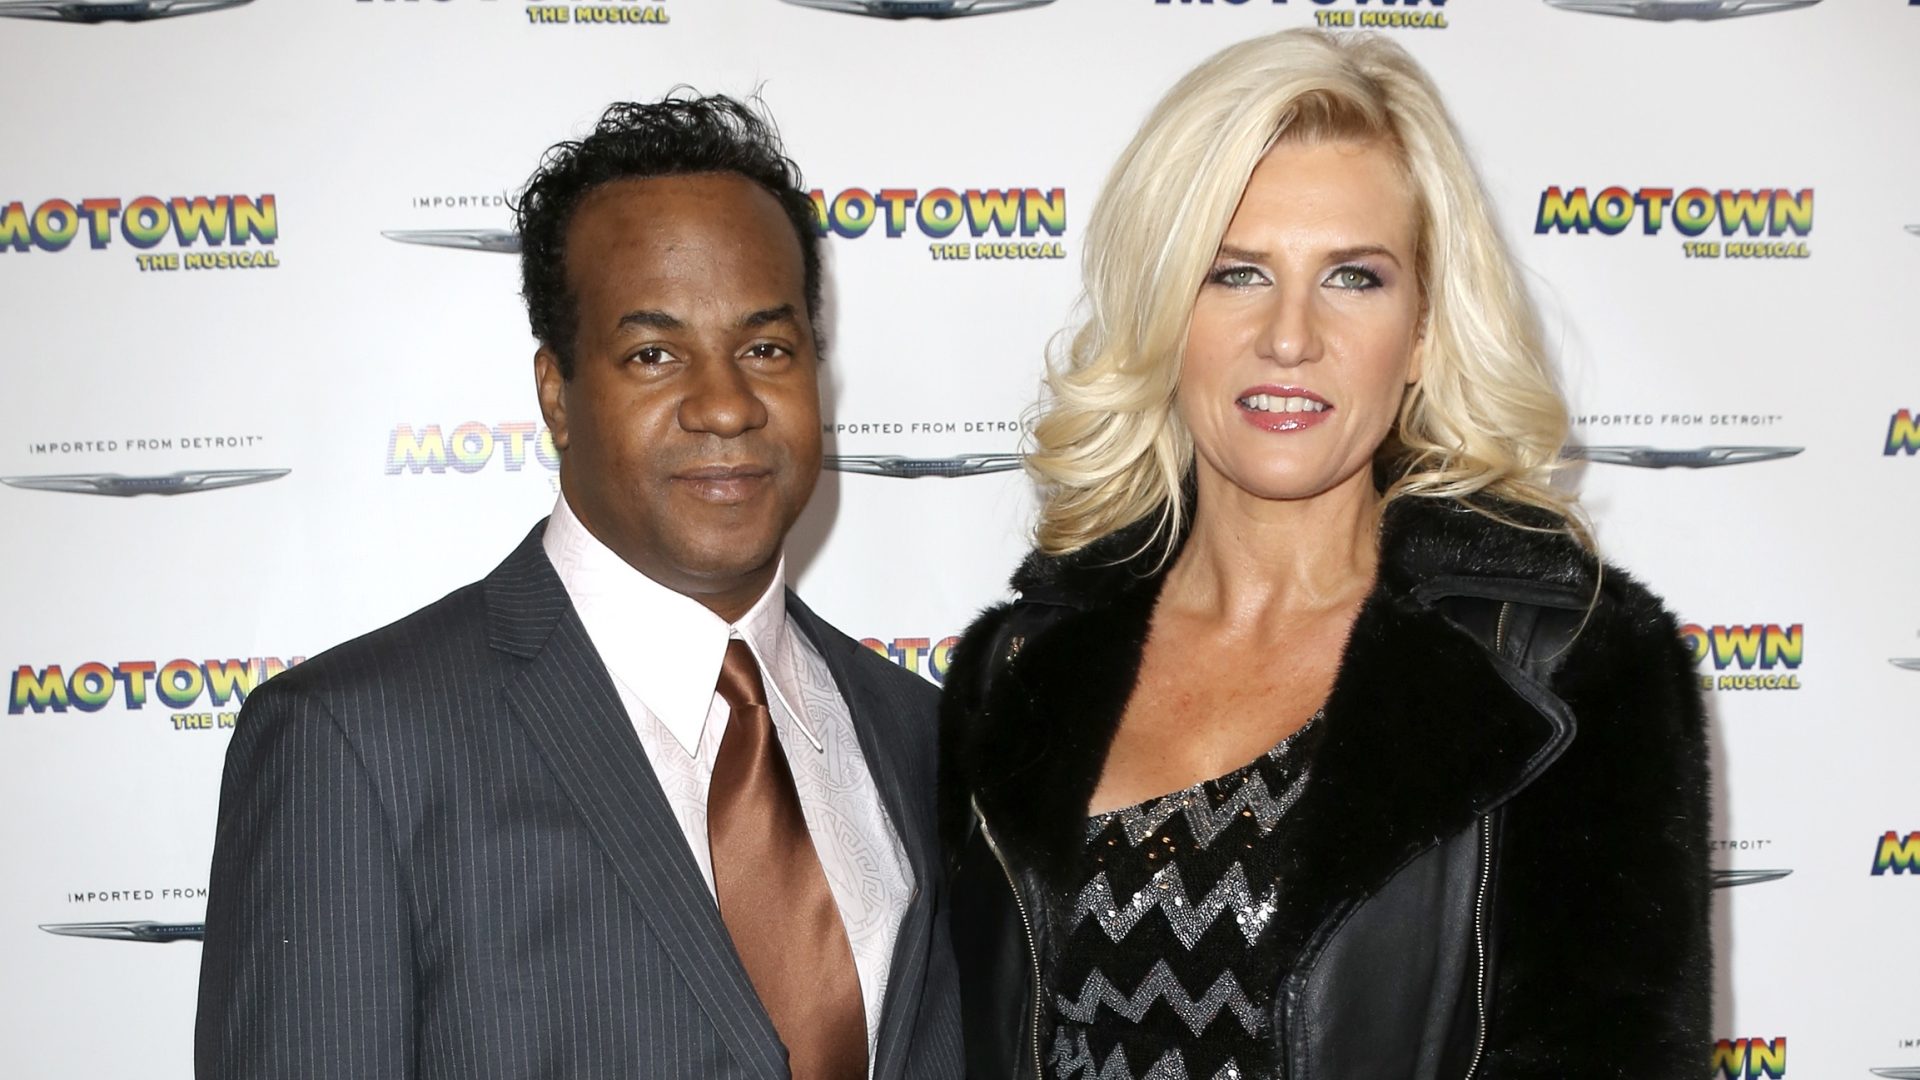 Marvin Gaye III Files For Divorce From Wife Two Months After Domestic Violence Arrest